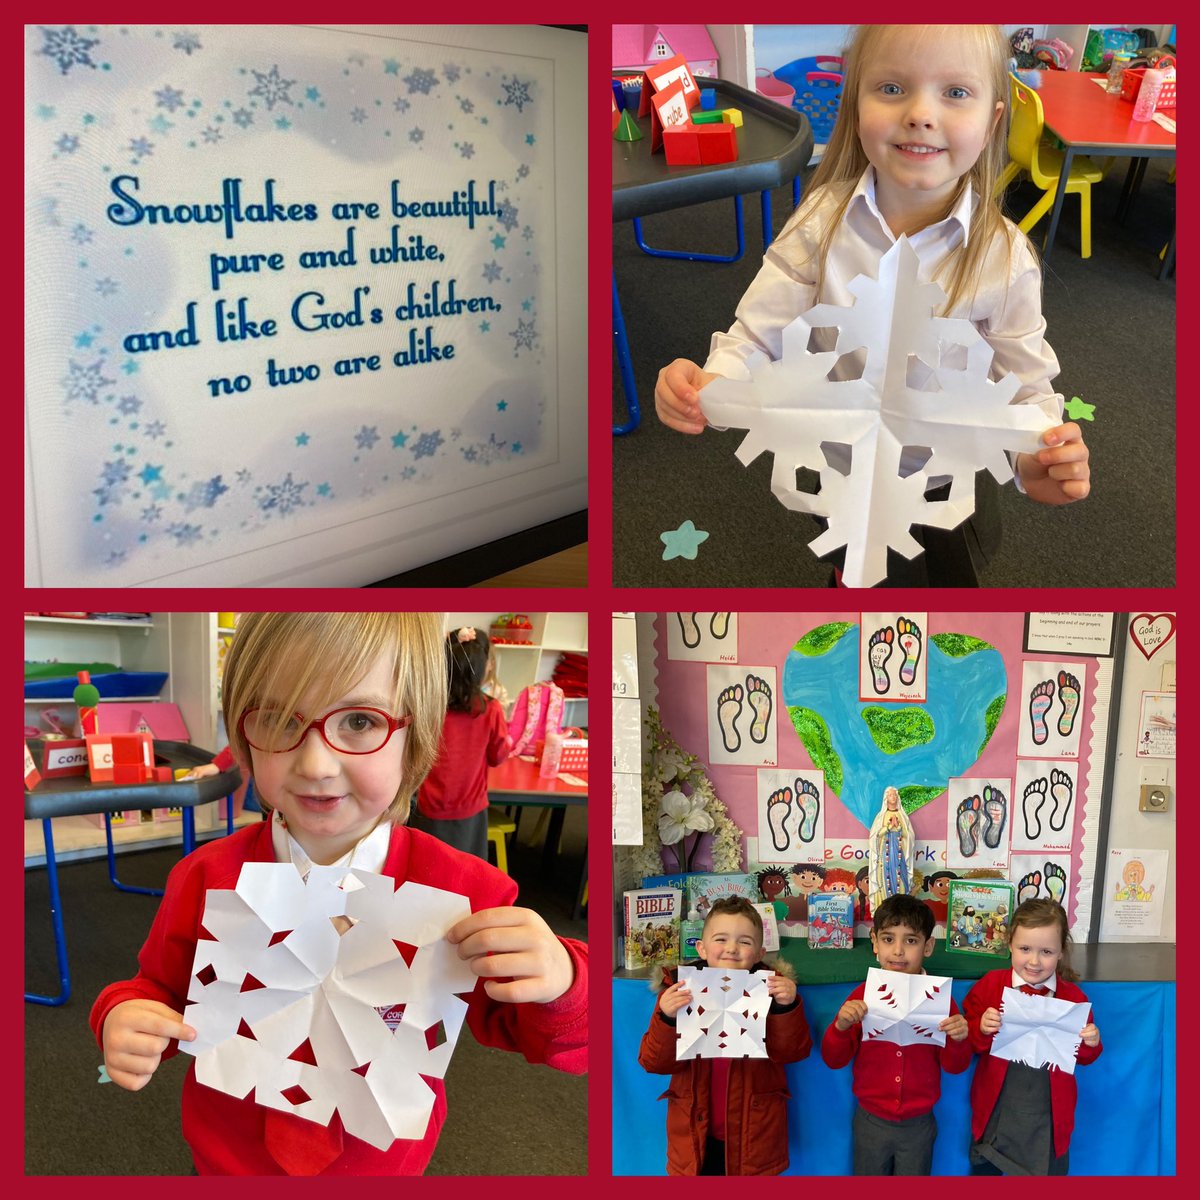 P1b have been learning all about God’s World in Winter. Today we wrapped up warm & went on a winter walk. We then made some beautiful, winter snowflakes. 🥰❄️ “Snowflakes are beautiful, pure and white, and like God’s children, no two are alike.” @CorpusChristi_K @ArchdiocGlasgow